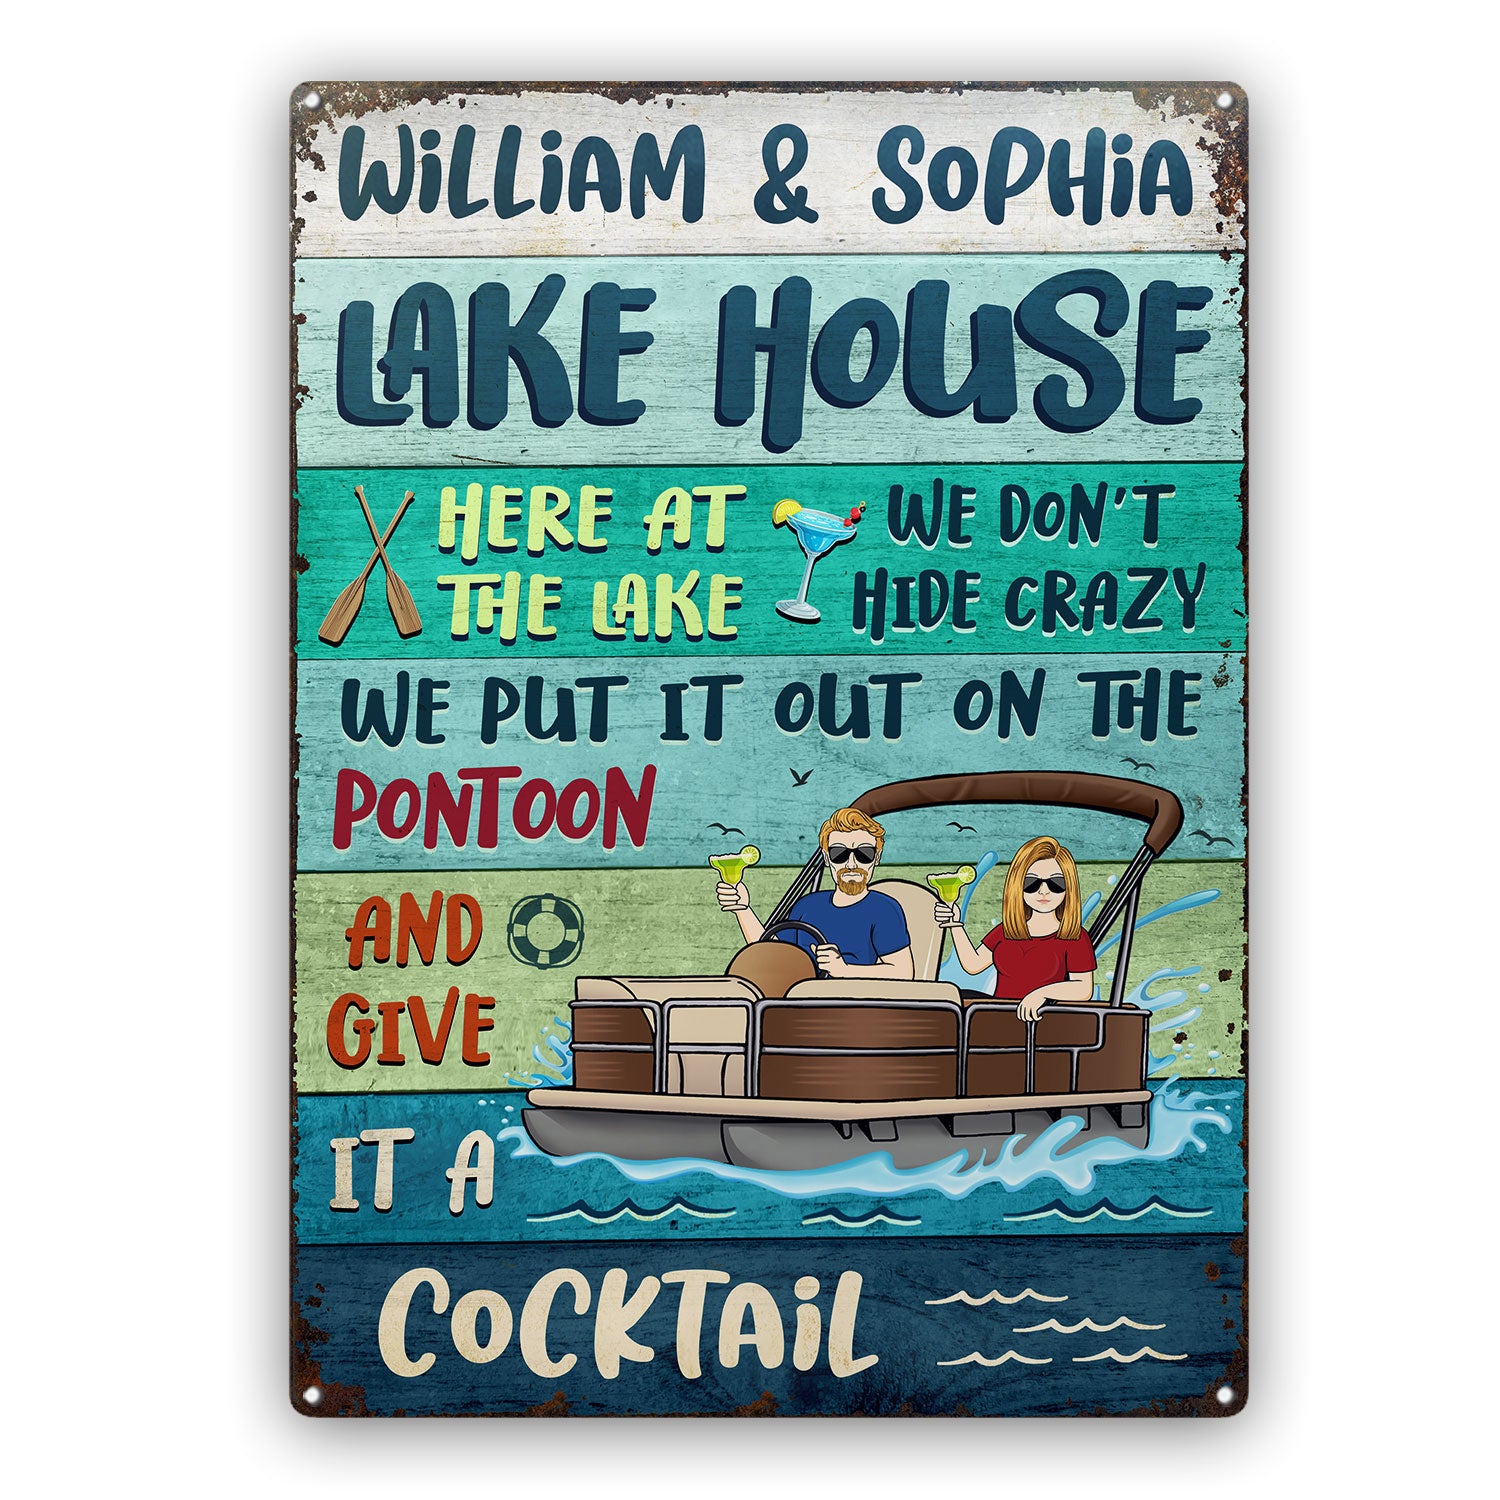 Here At The Lake We Don't Hide Crazy Pontoon - Home Decor, Backyard Decor, Lake House Sign, Gift For Her, Him, Family, Couples, Husband, Wife - Personalized Custom Classic Metal Signs